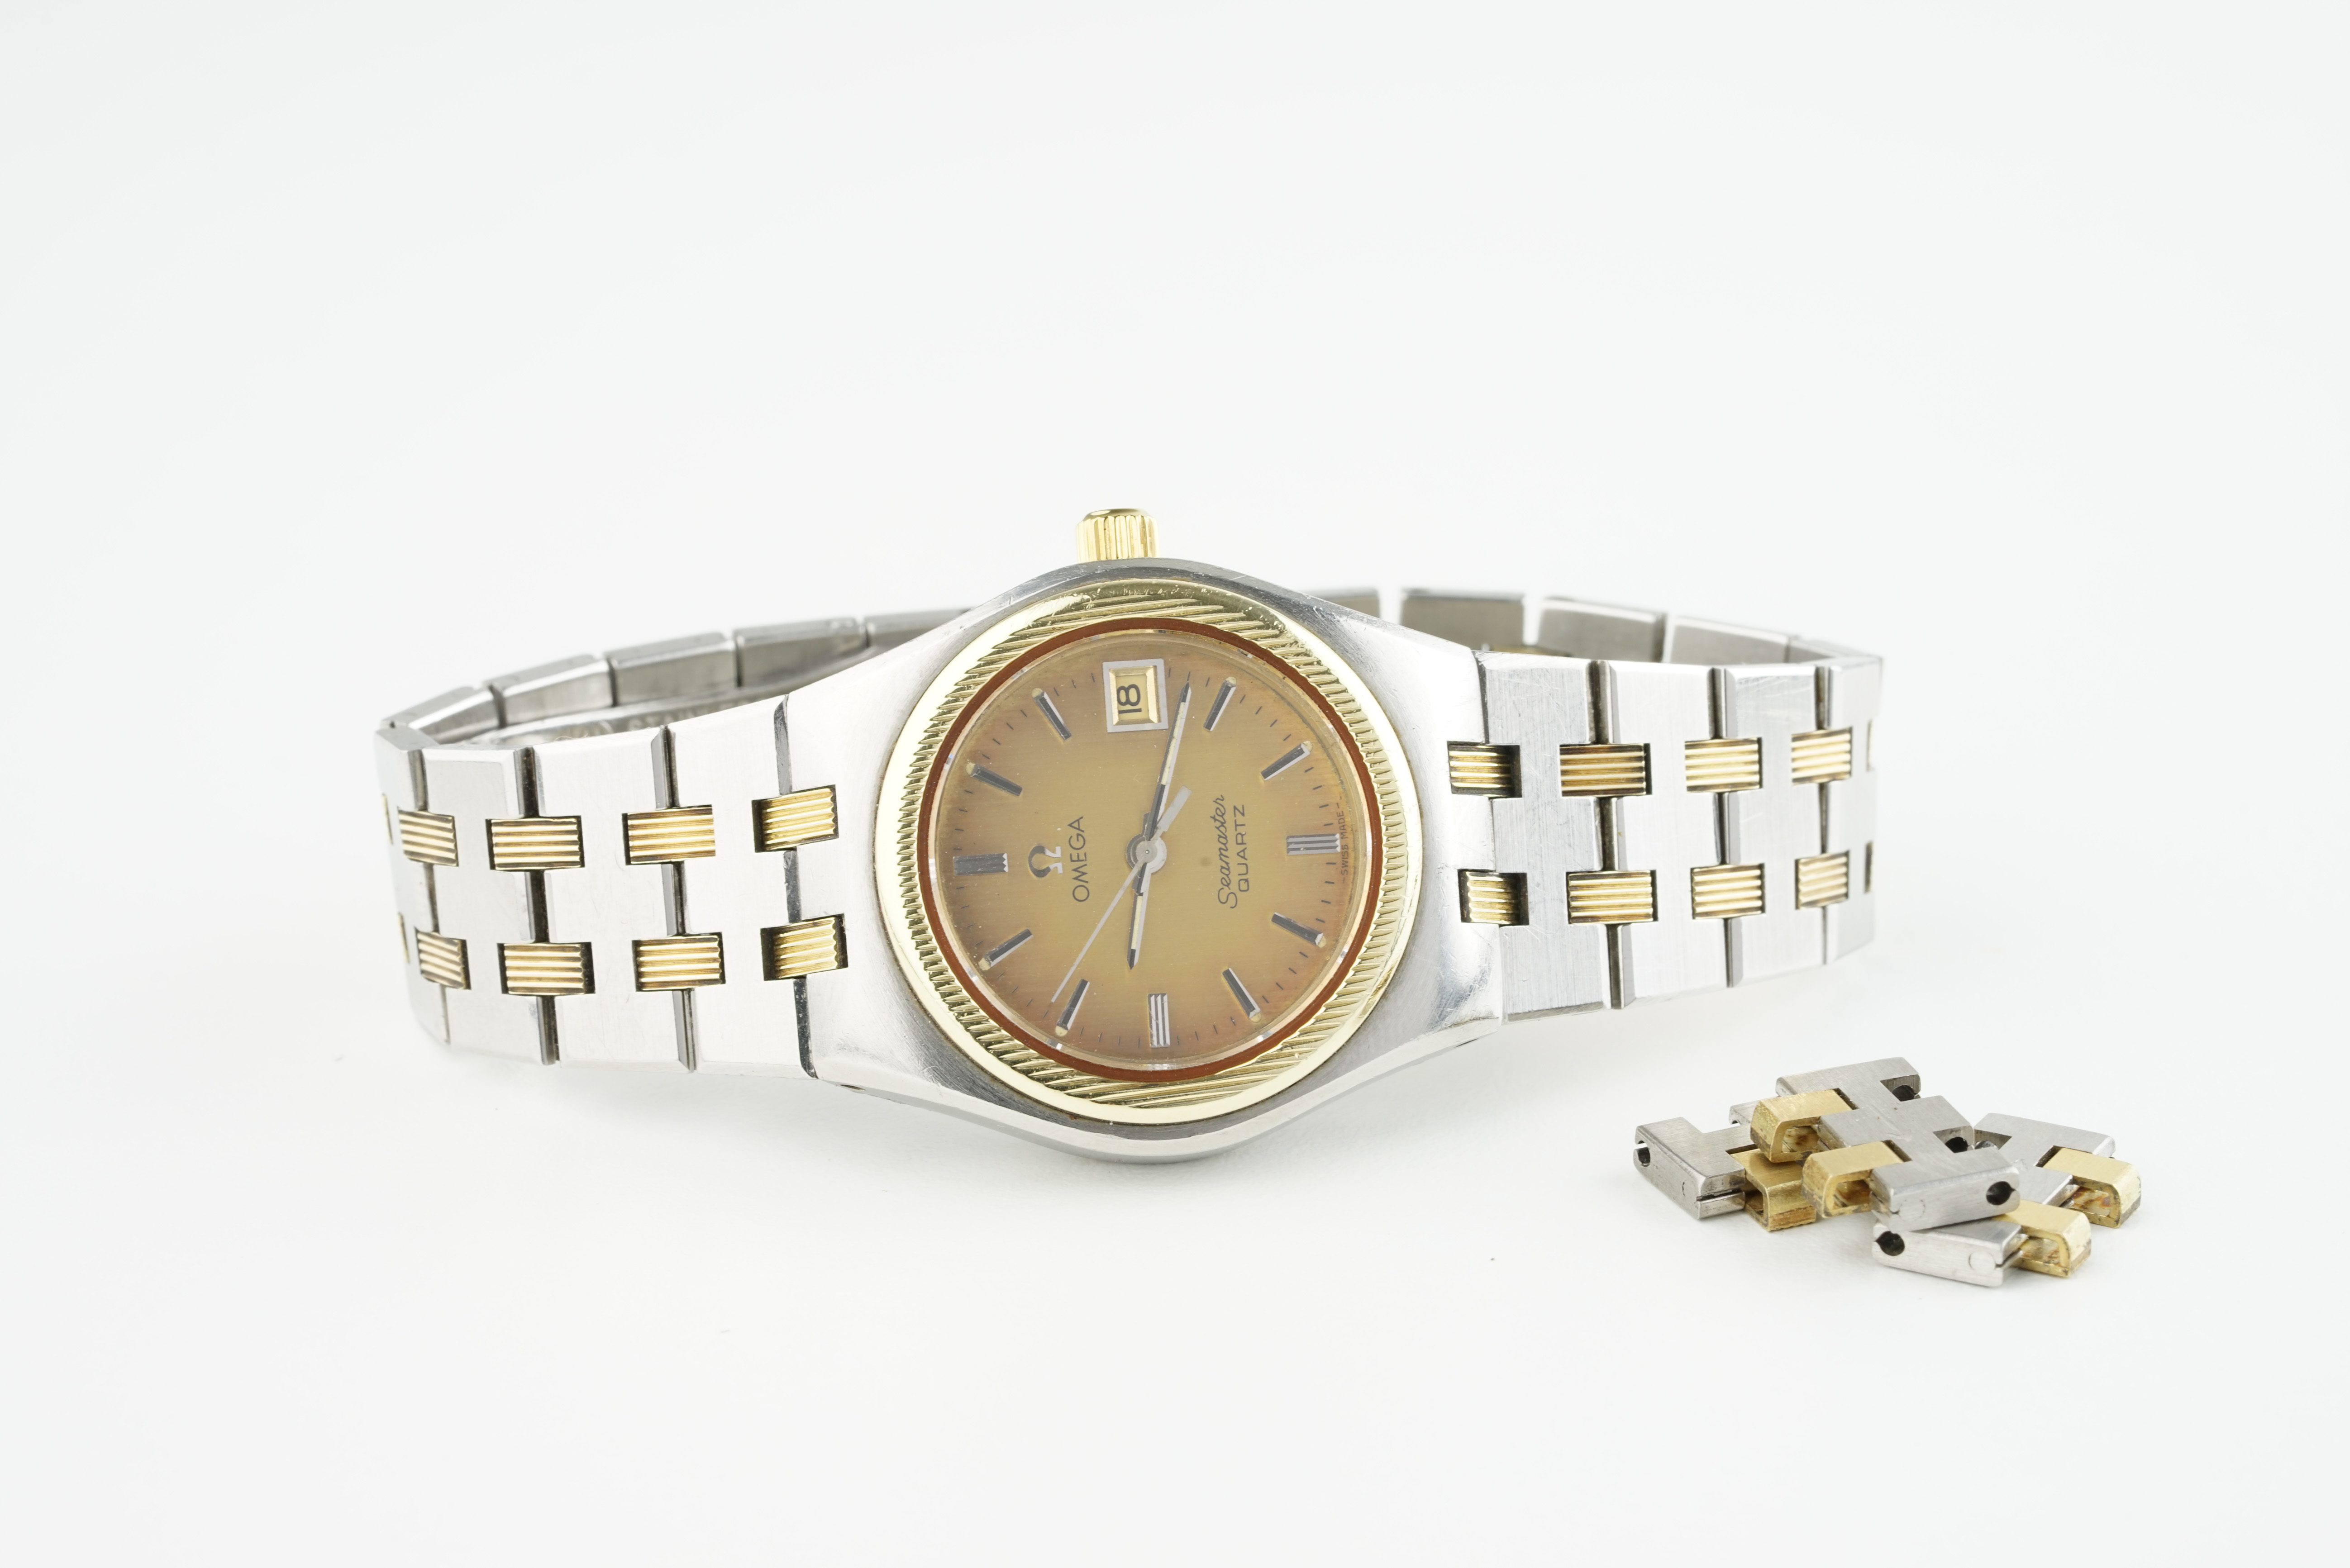 LADIES OMEGA SEAMASTER QUARTZ WRISTWATCH, circular gold dial with hour markers and hands, date